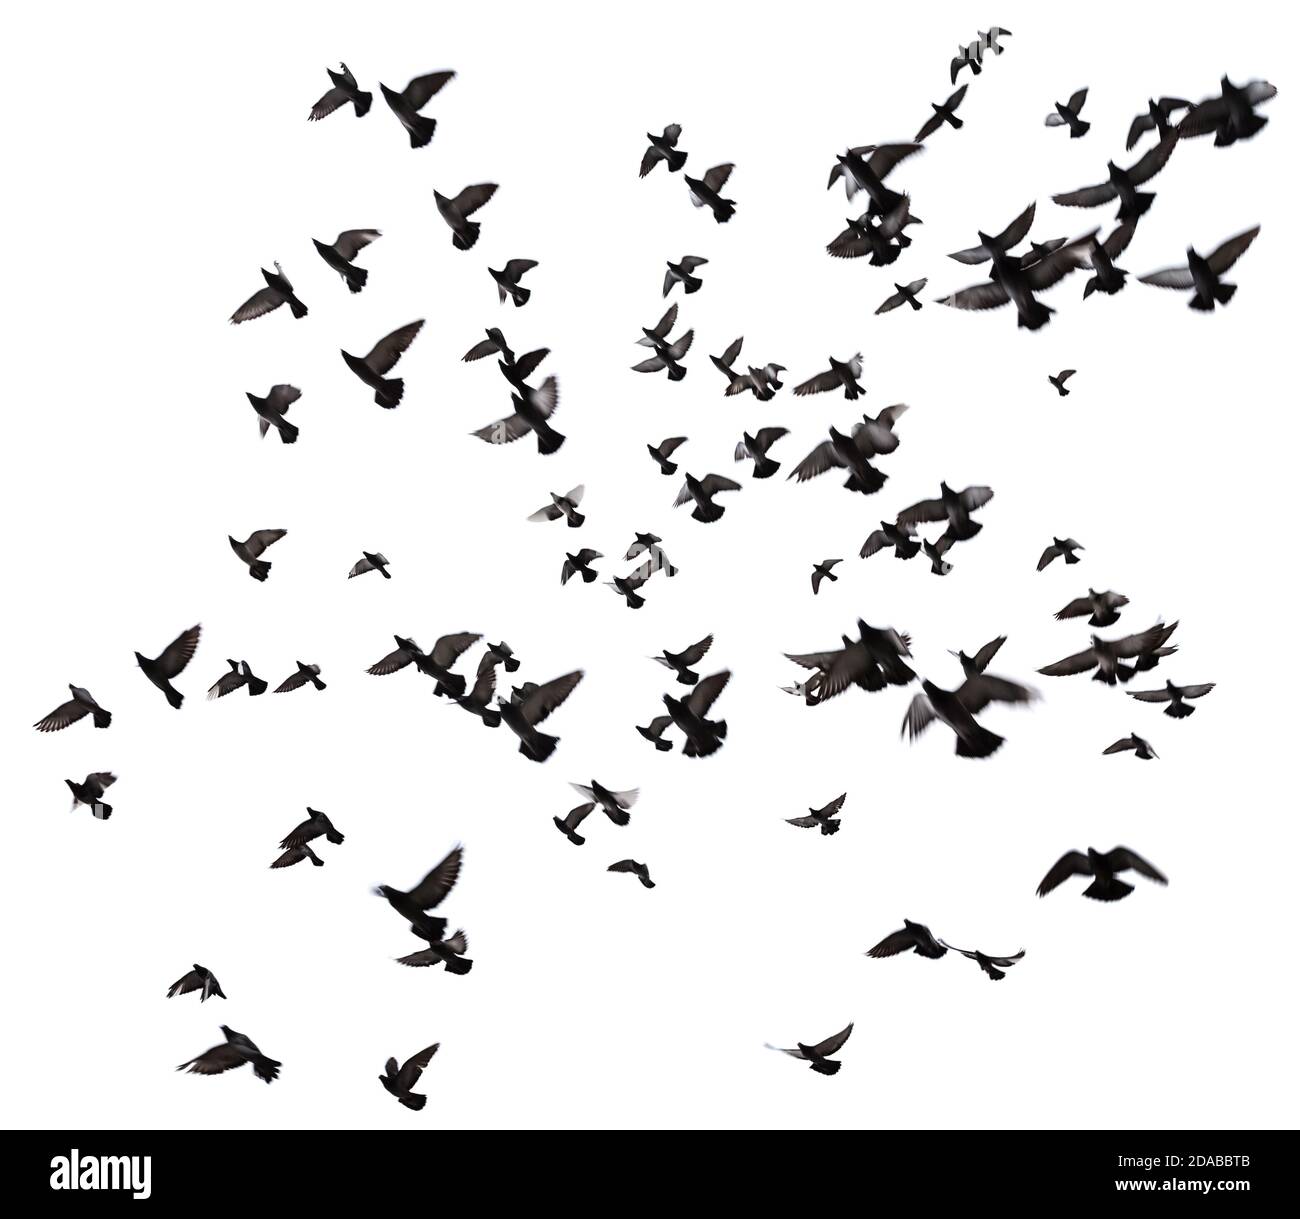 Silhouettes of pigeons. Many birds flying in the sky. Motion blur ...